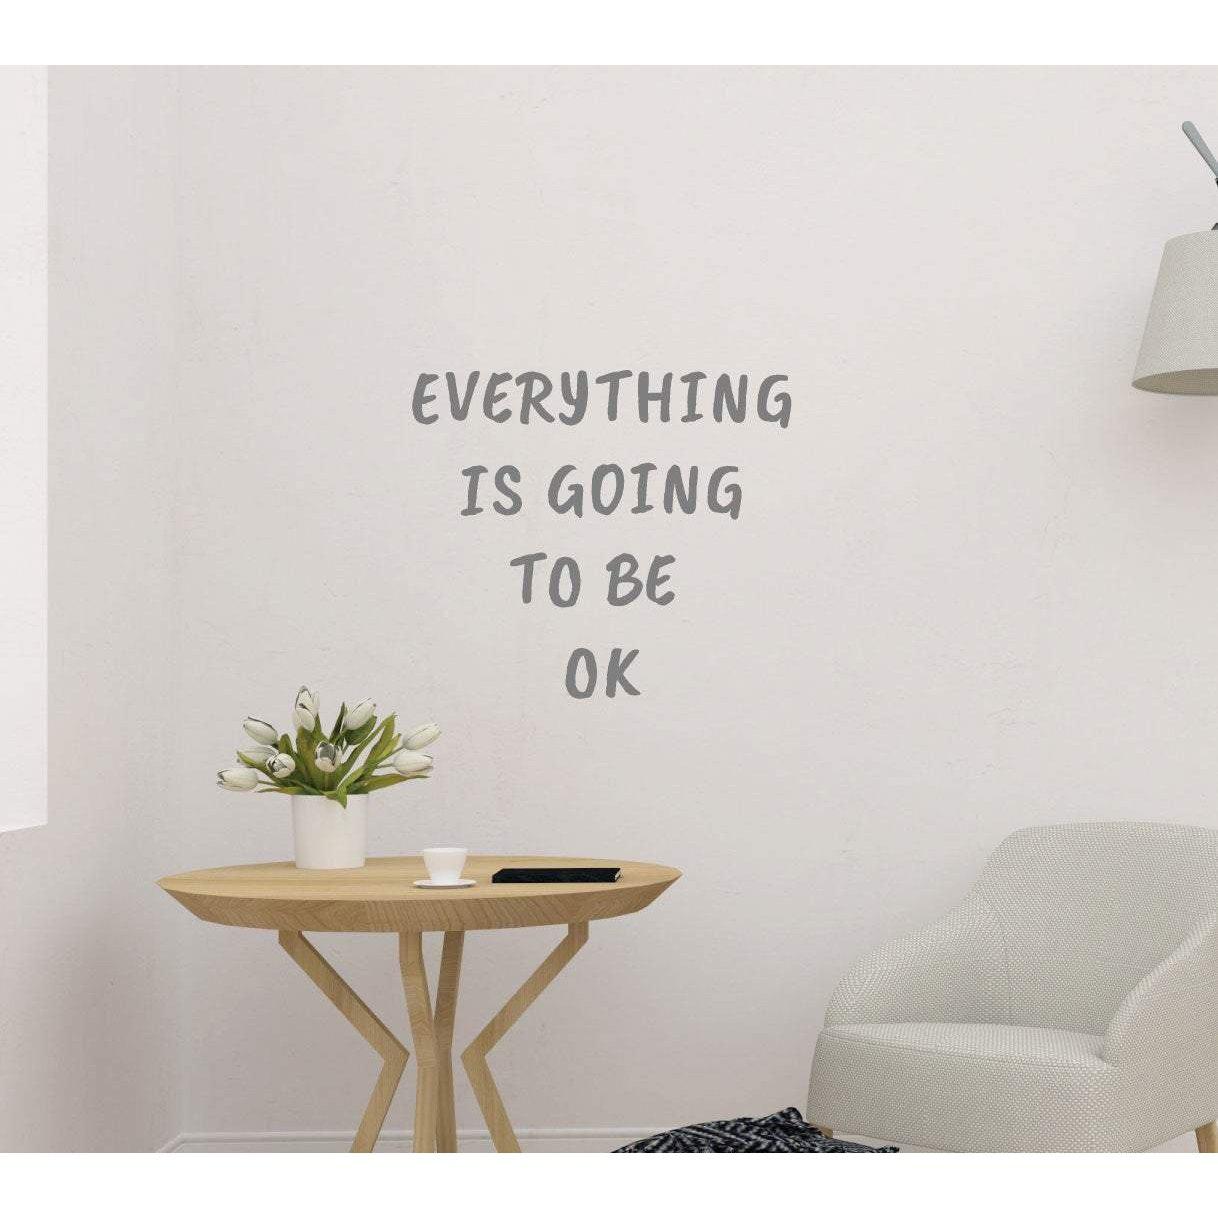 Everthing Is Going To Be Ok Motivational Wall Sticker Quote